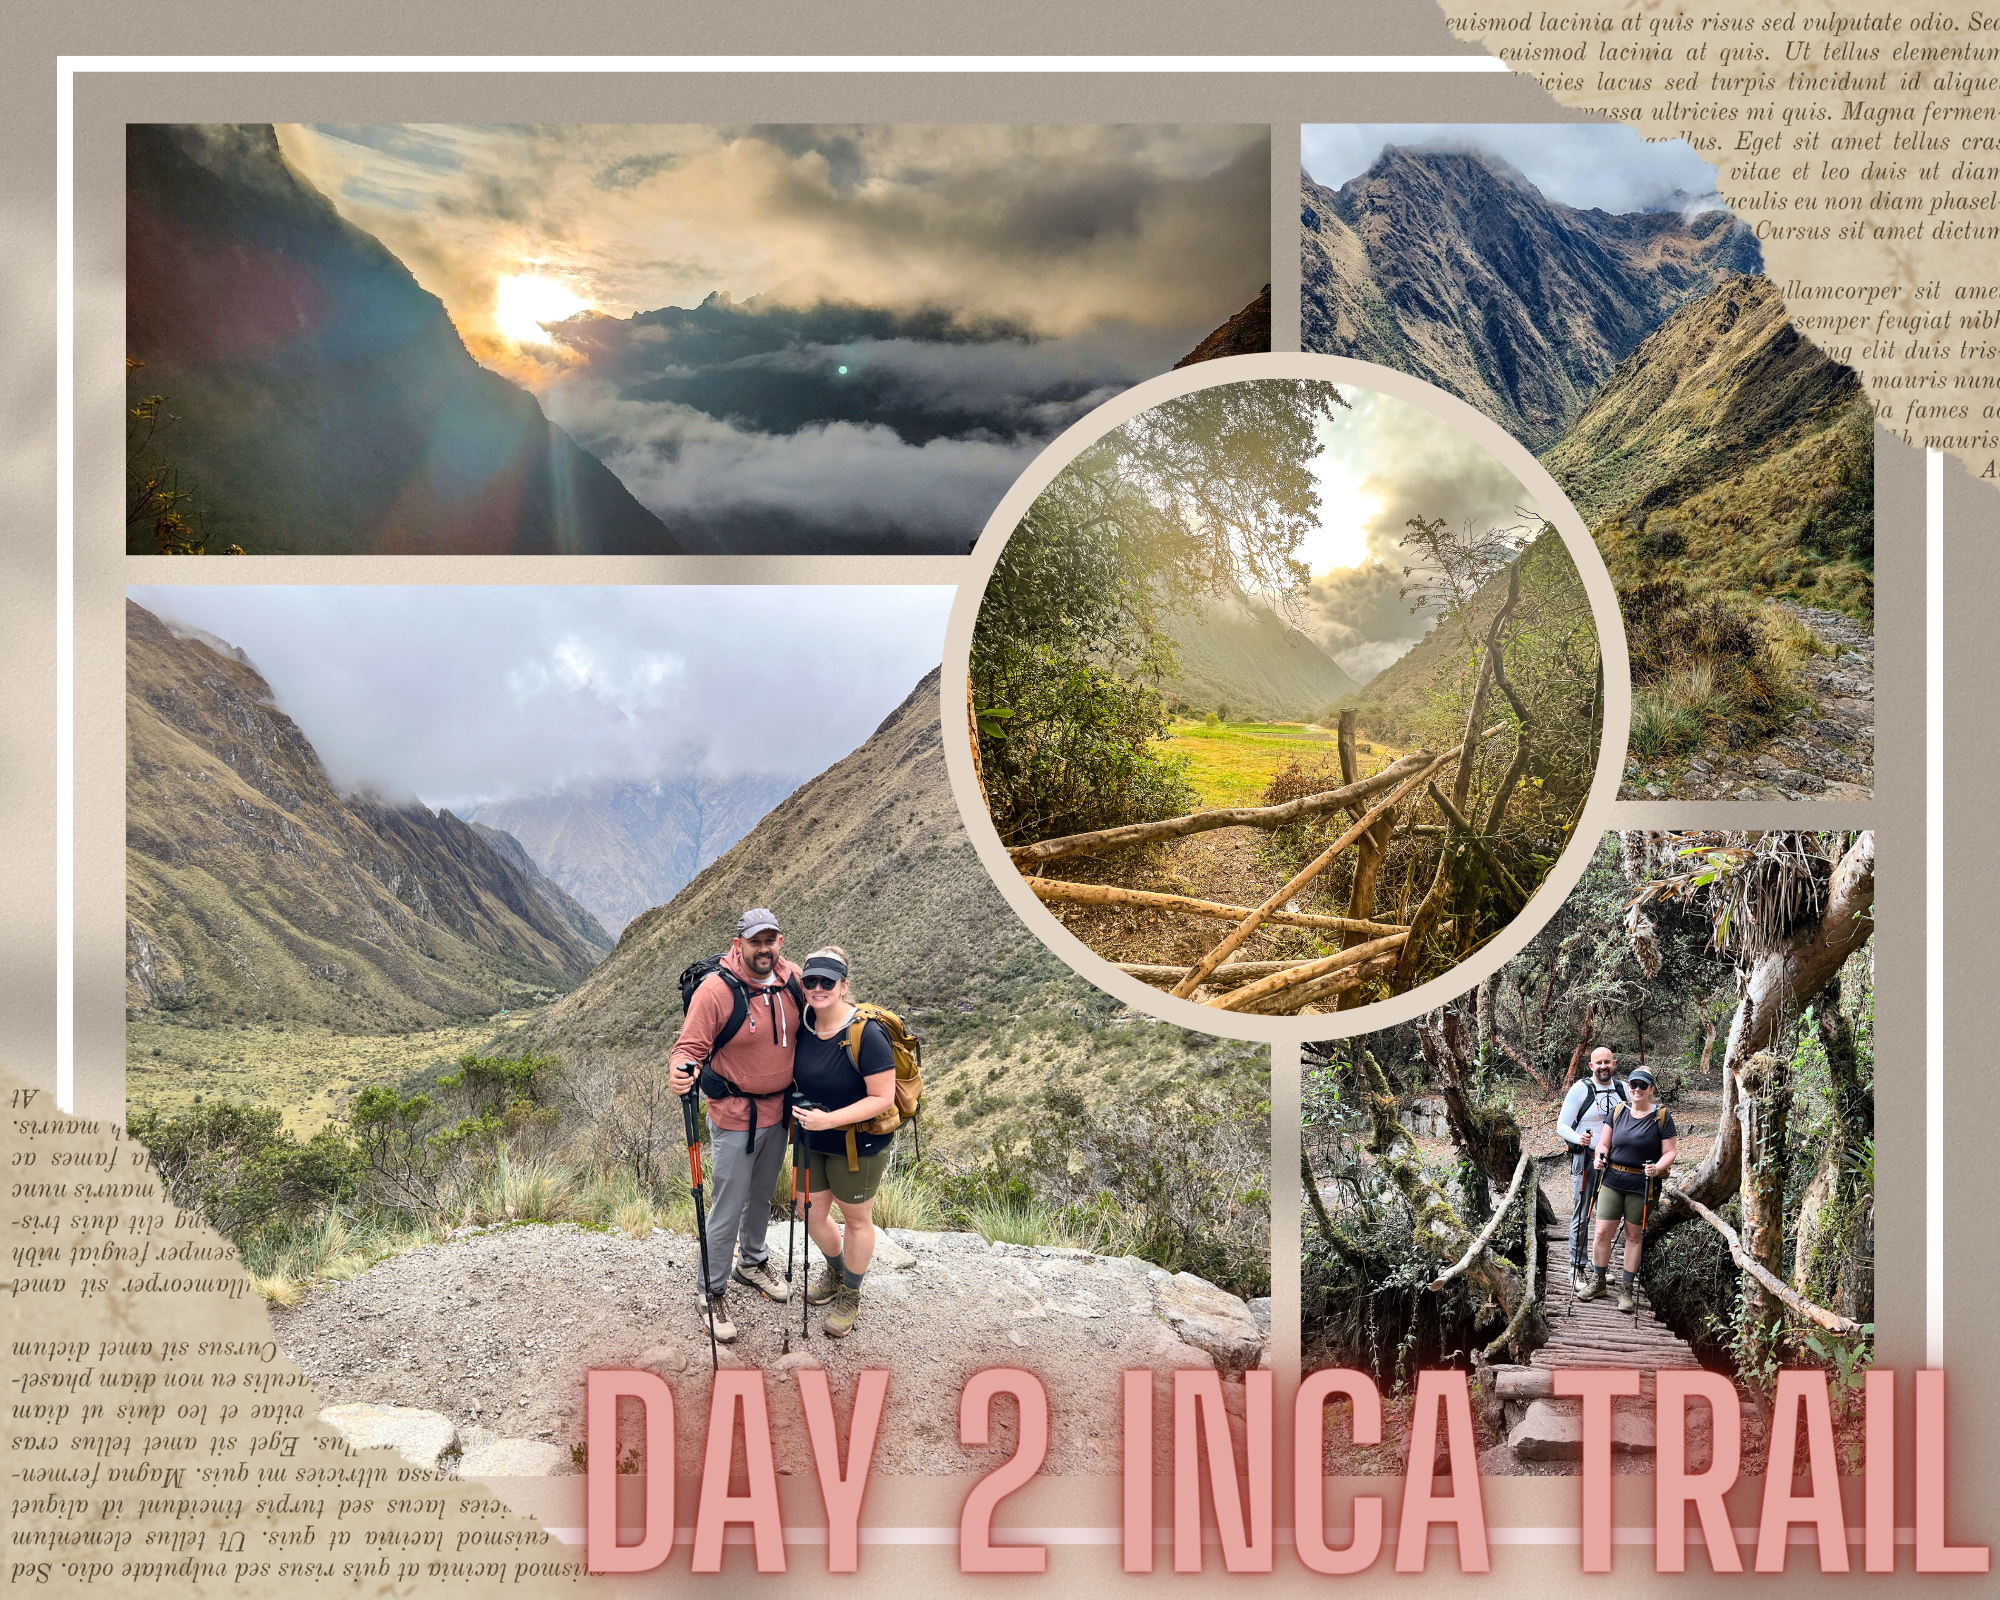 Day 2 of the Inca Trail: A Venture to Dead Woman’s Pass on the Inca Trail